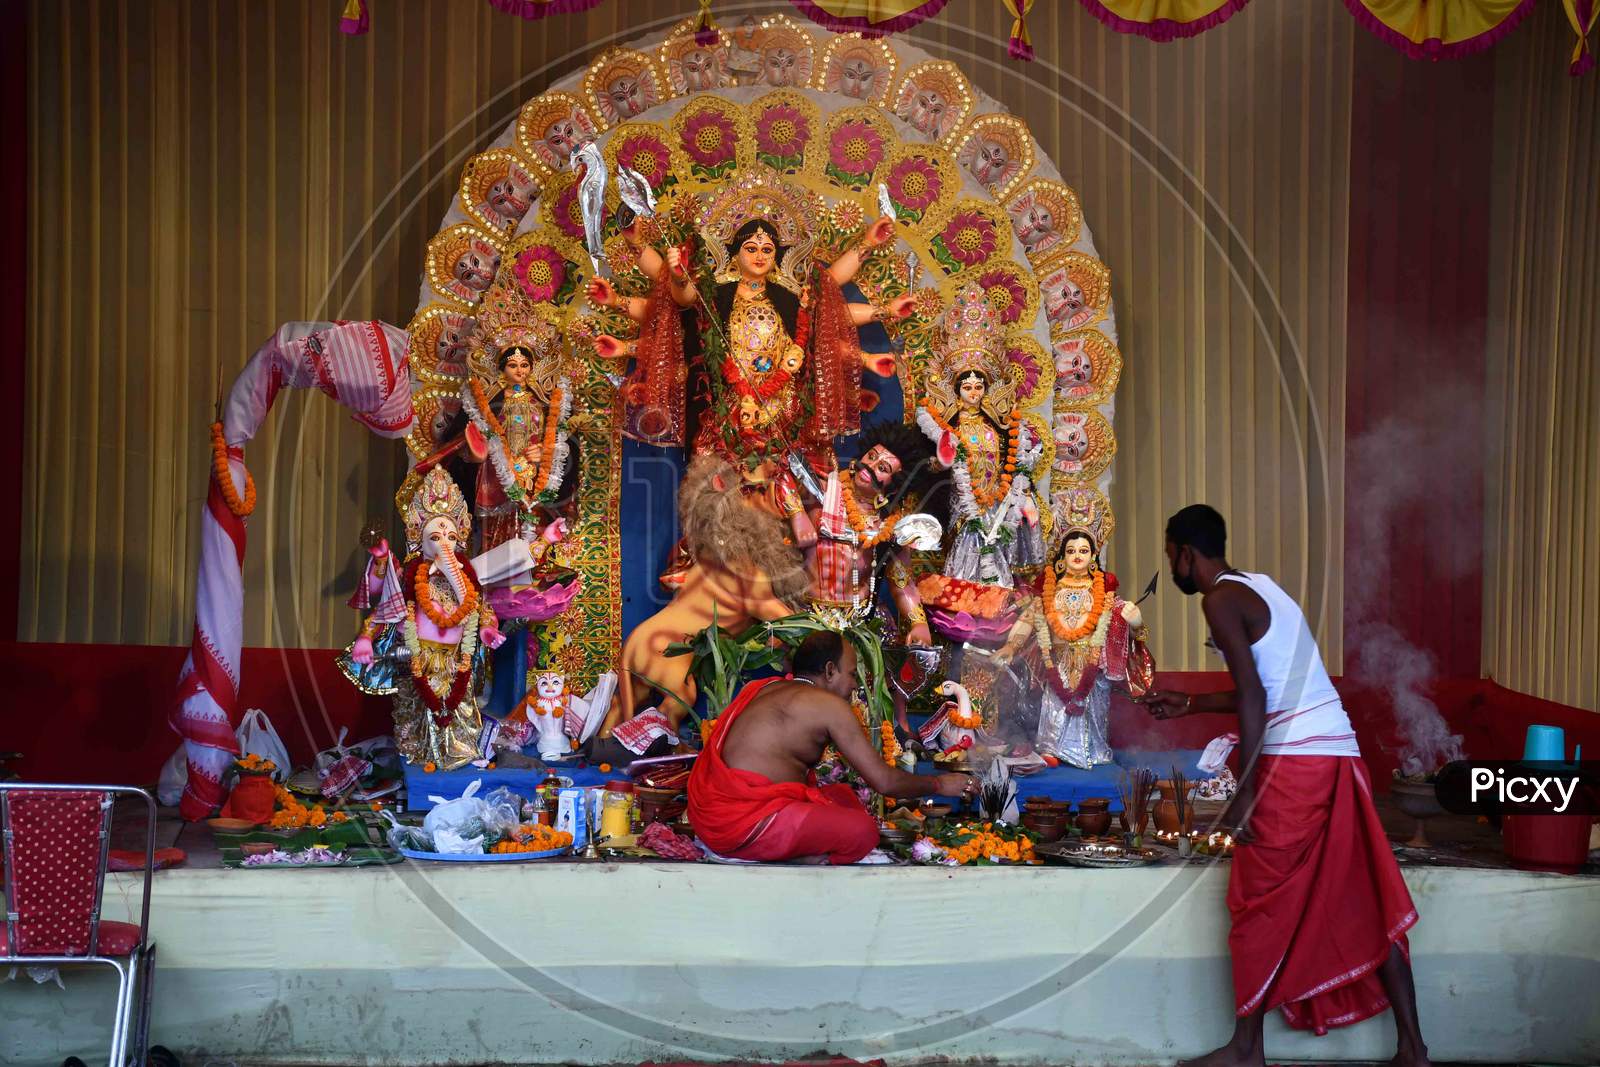 Priest  offer prayers at a community pandal during the Maha  navami  of Durga Puja, in Guwahati on Oct 25,2020